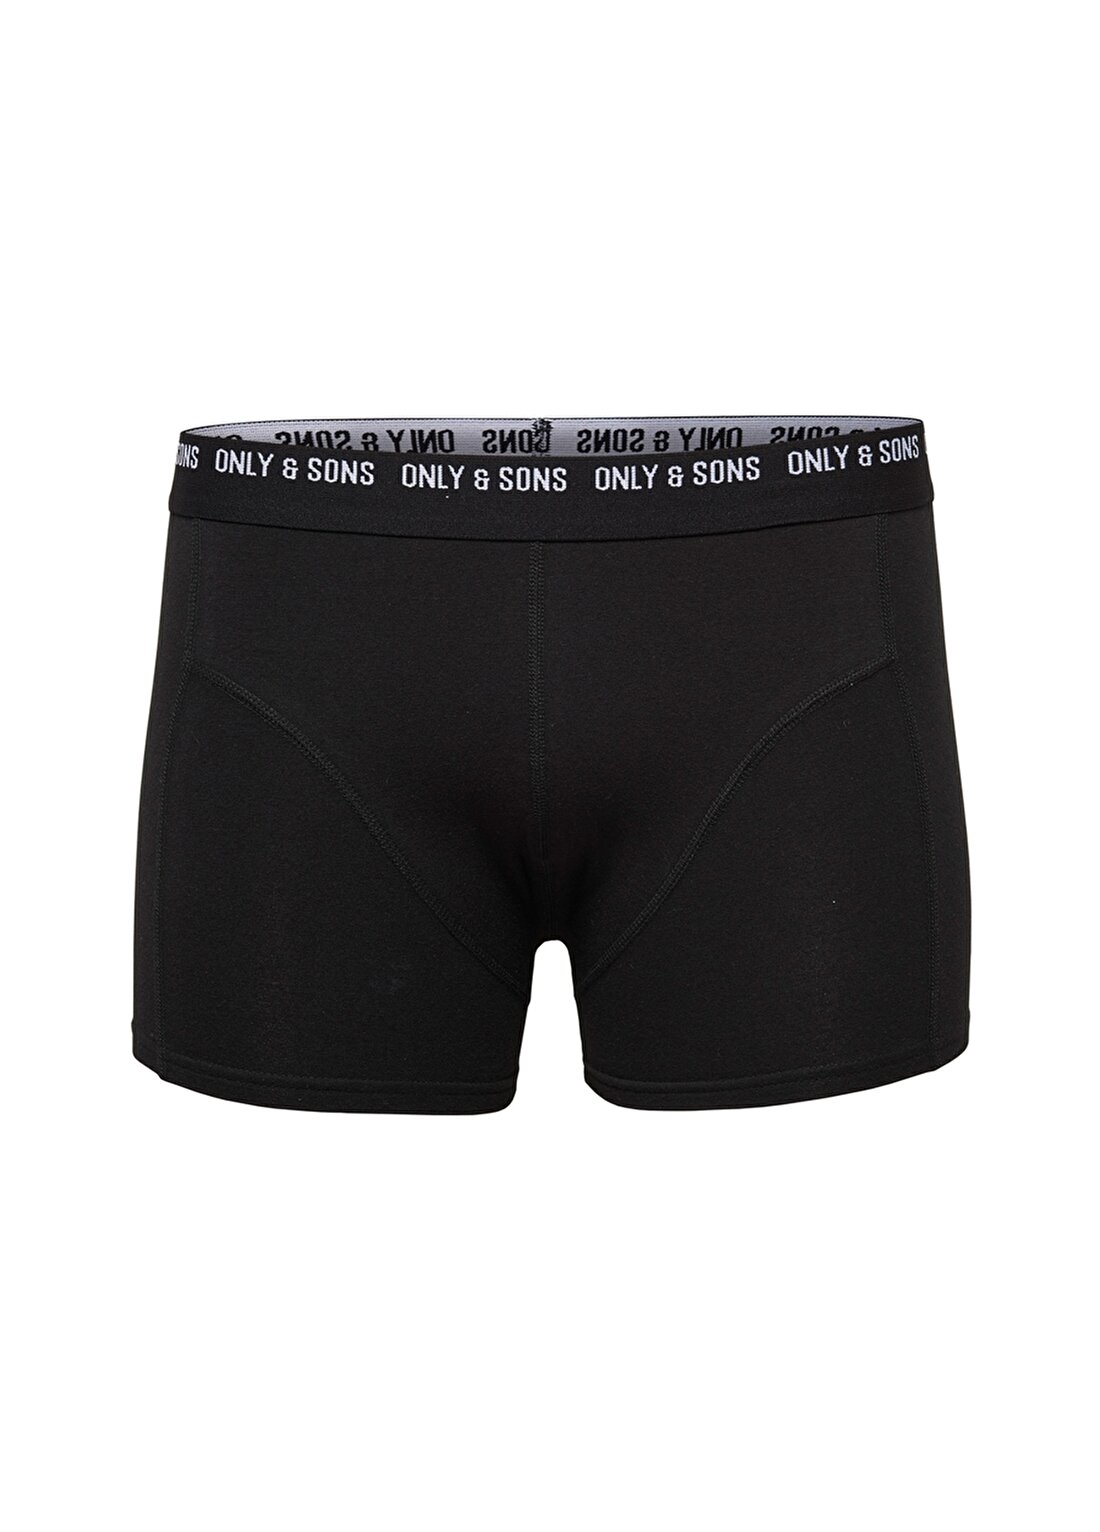 Only & Sons Boxer